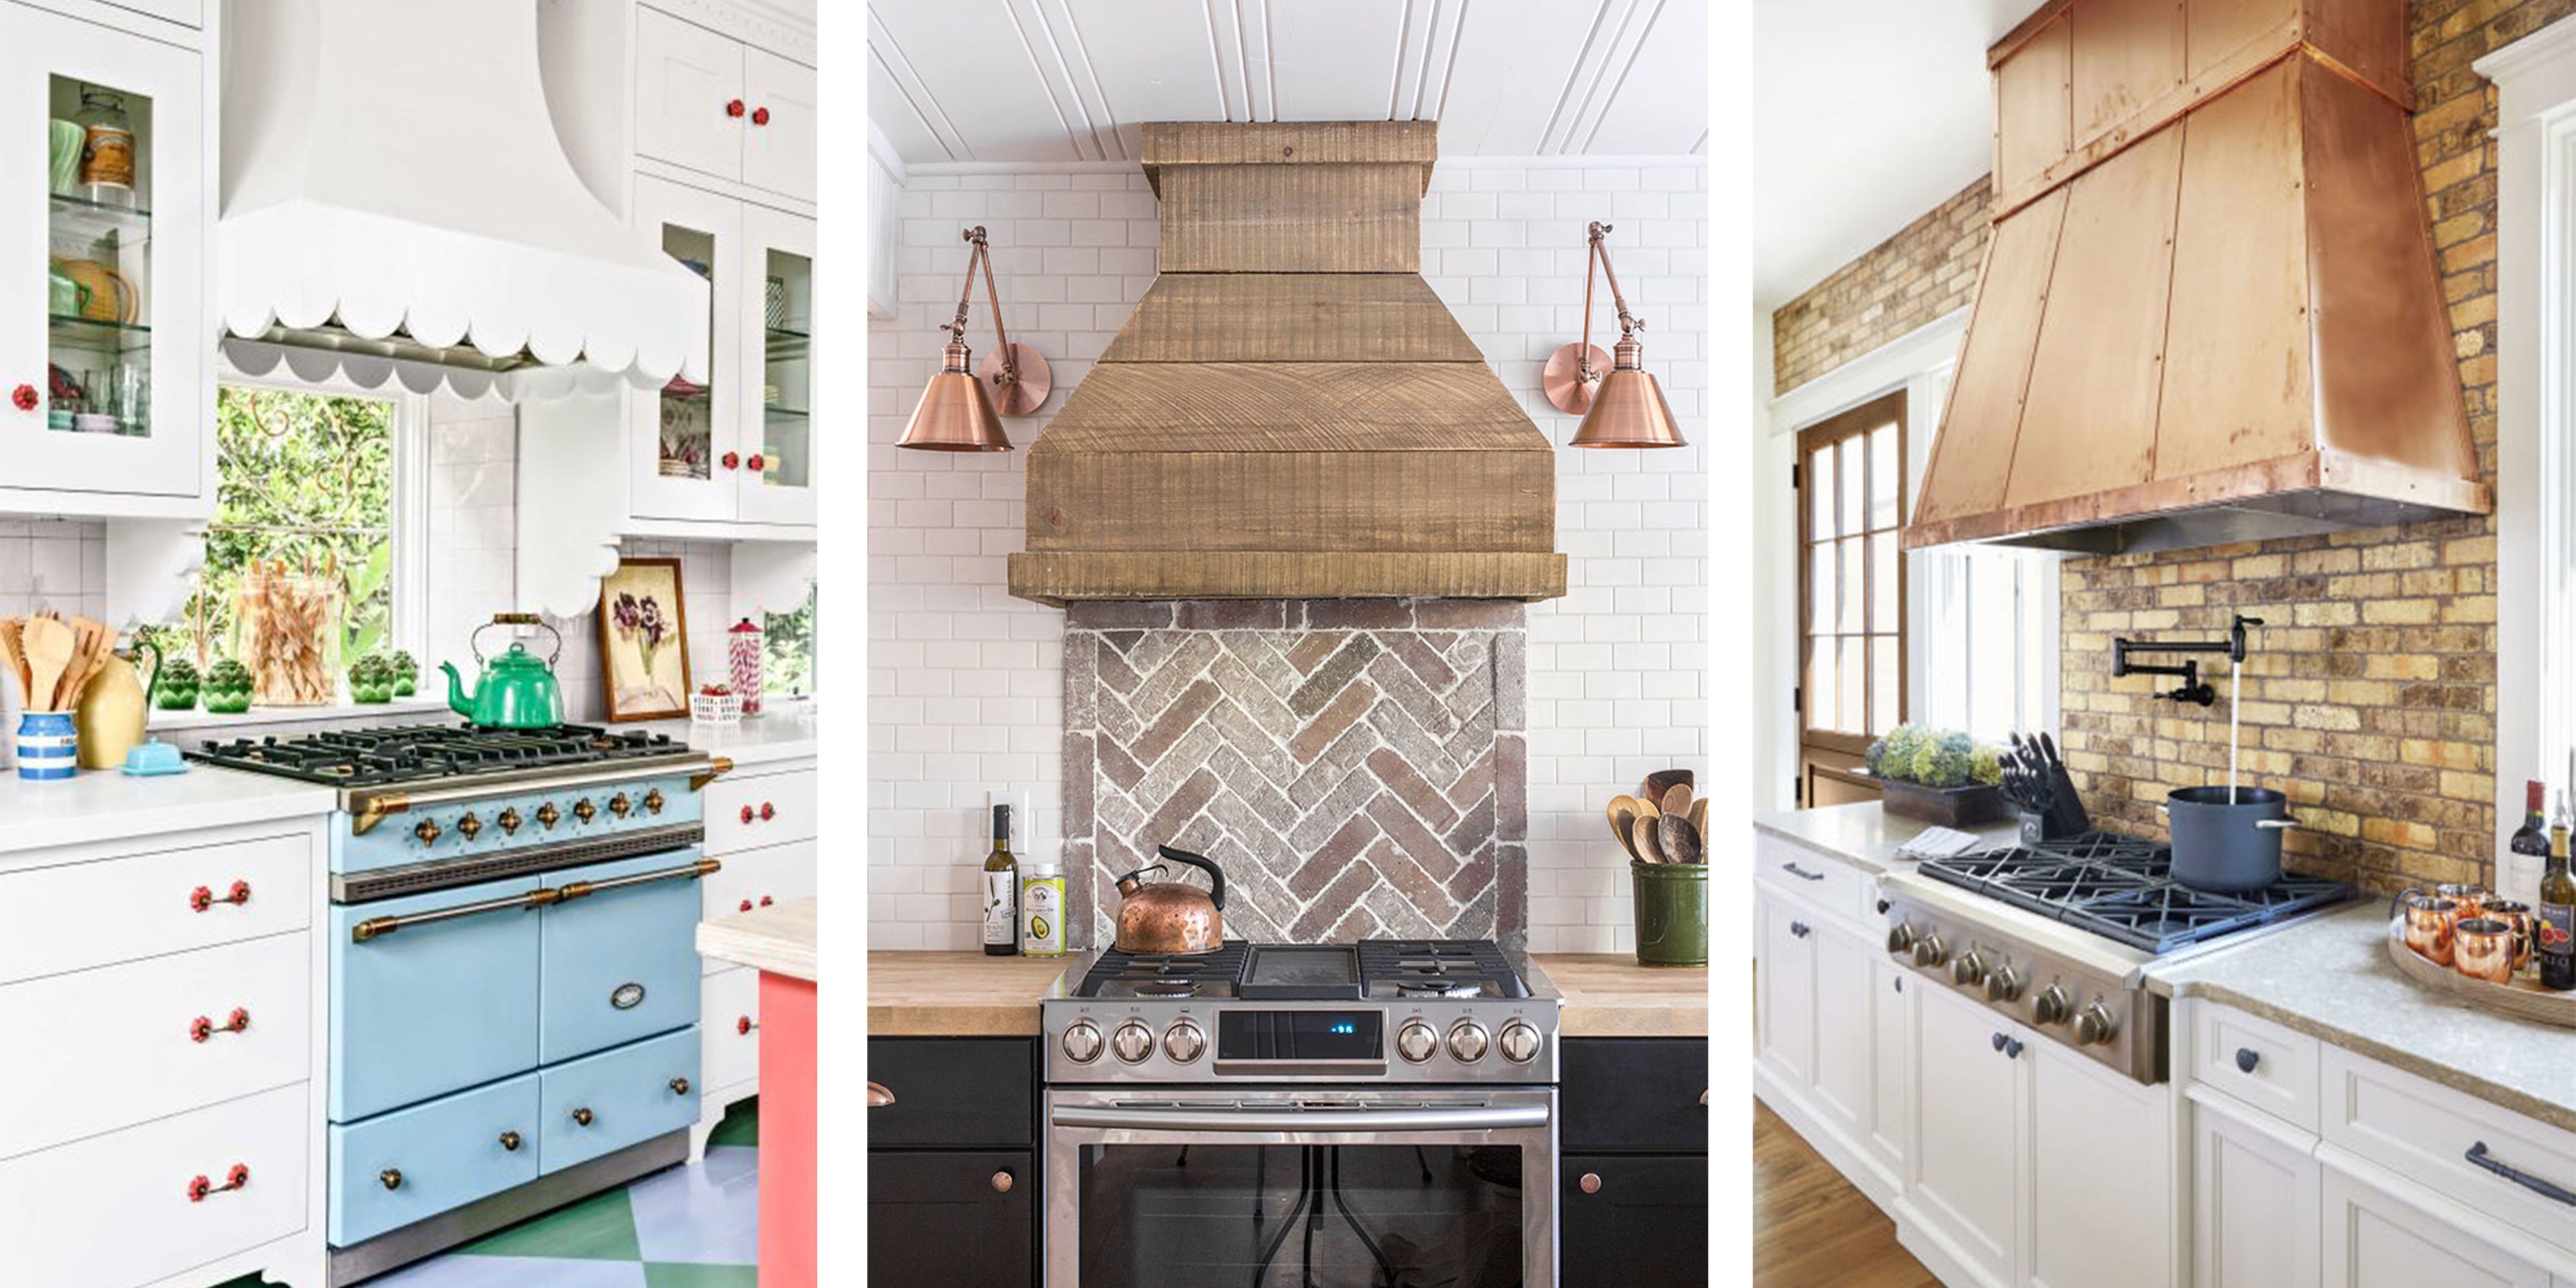 15 Gorgeous Kitchen Range Hoods That Are Eye Candy (Not Eyesores) - The  Most Beautiful Kitchen Hoods We've Ever Seen